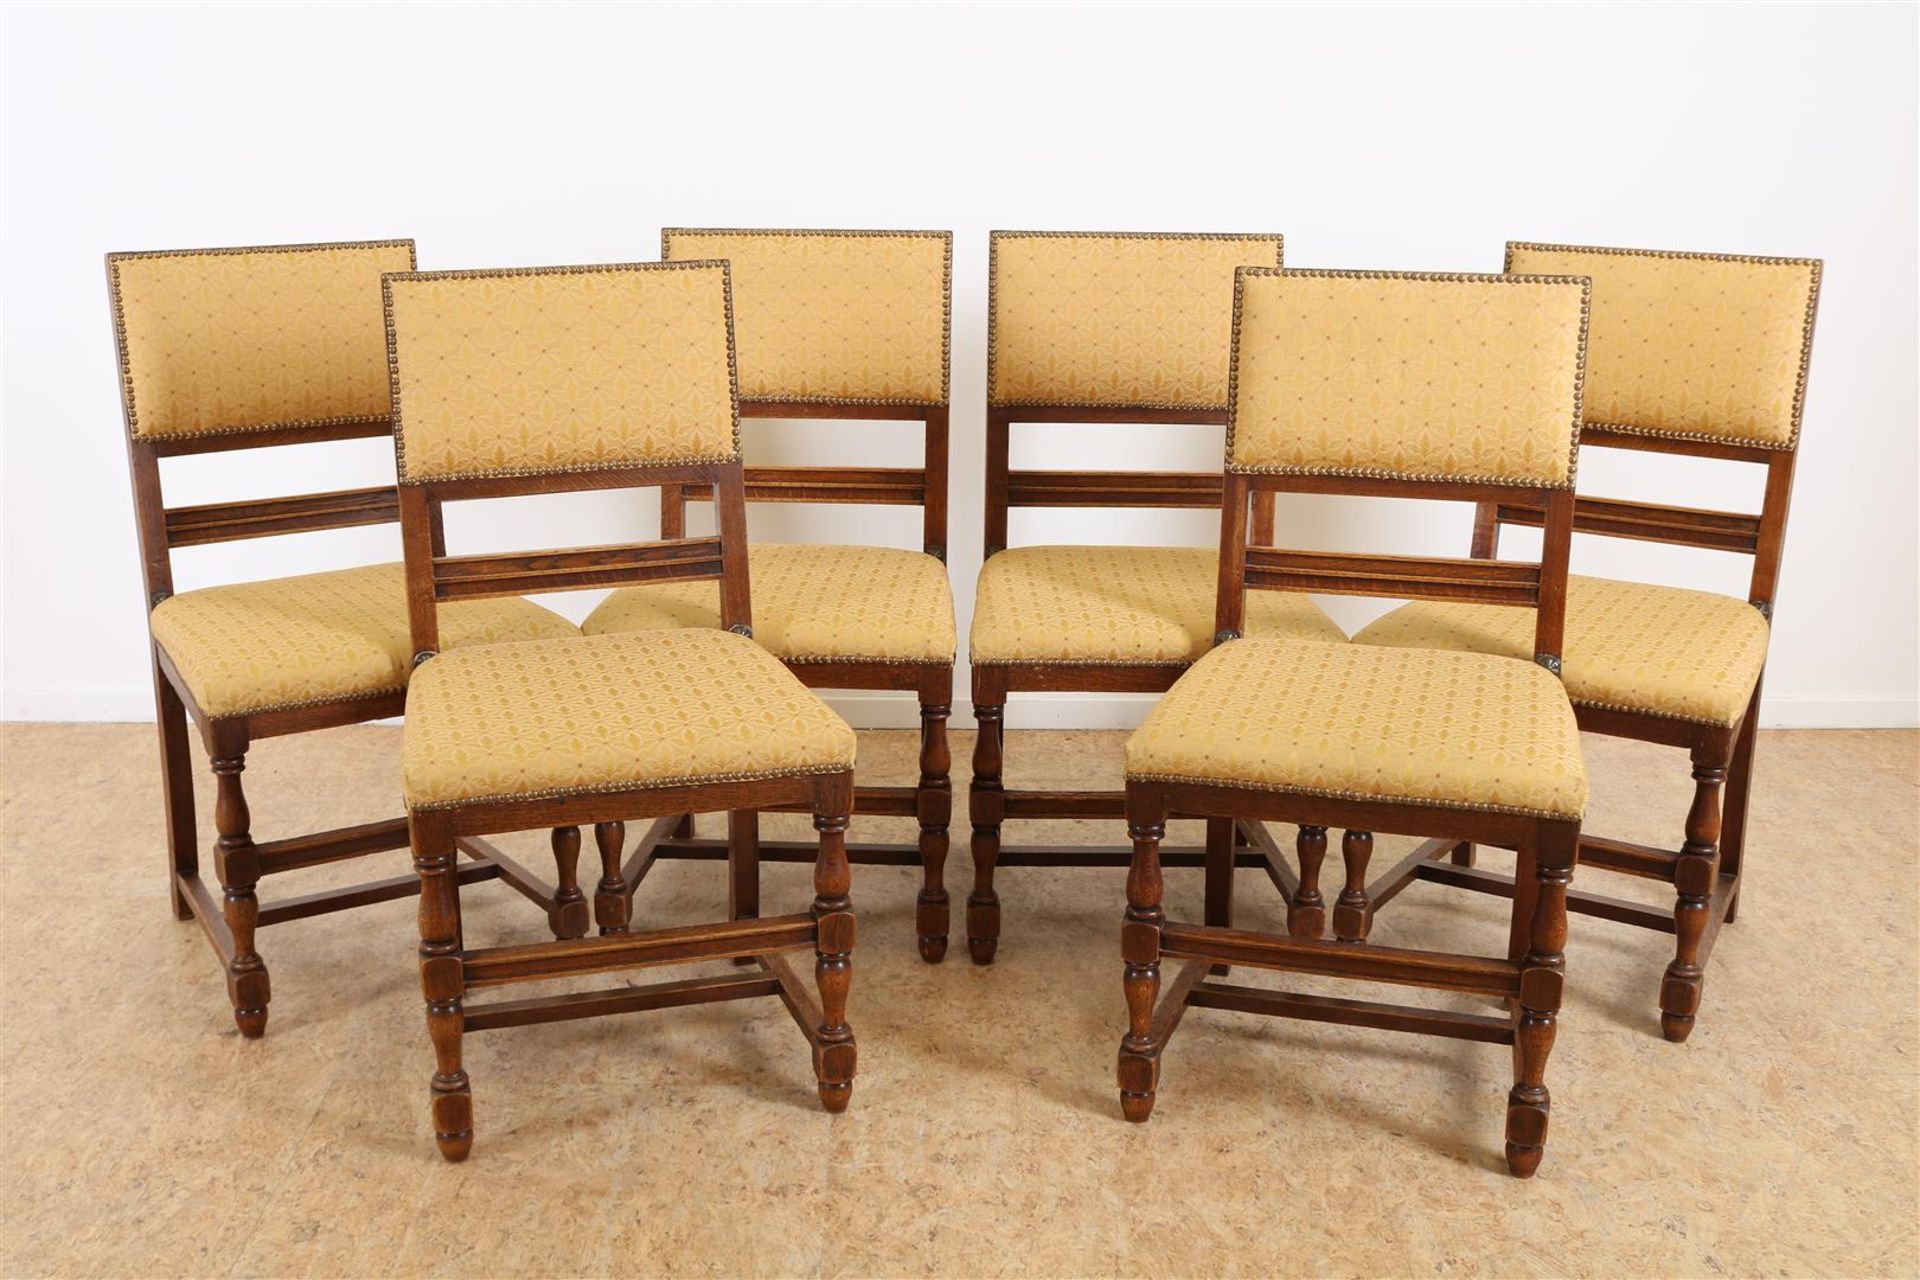 Series of 6 oak Renaissance-style chairs on vase legs connected by rules, early 20th century.